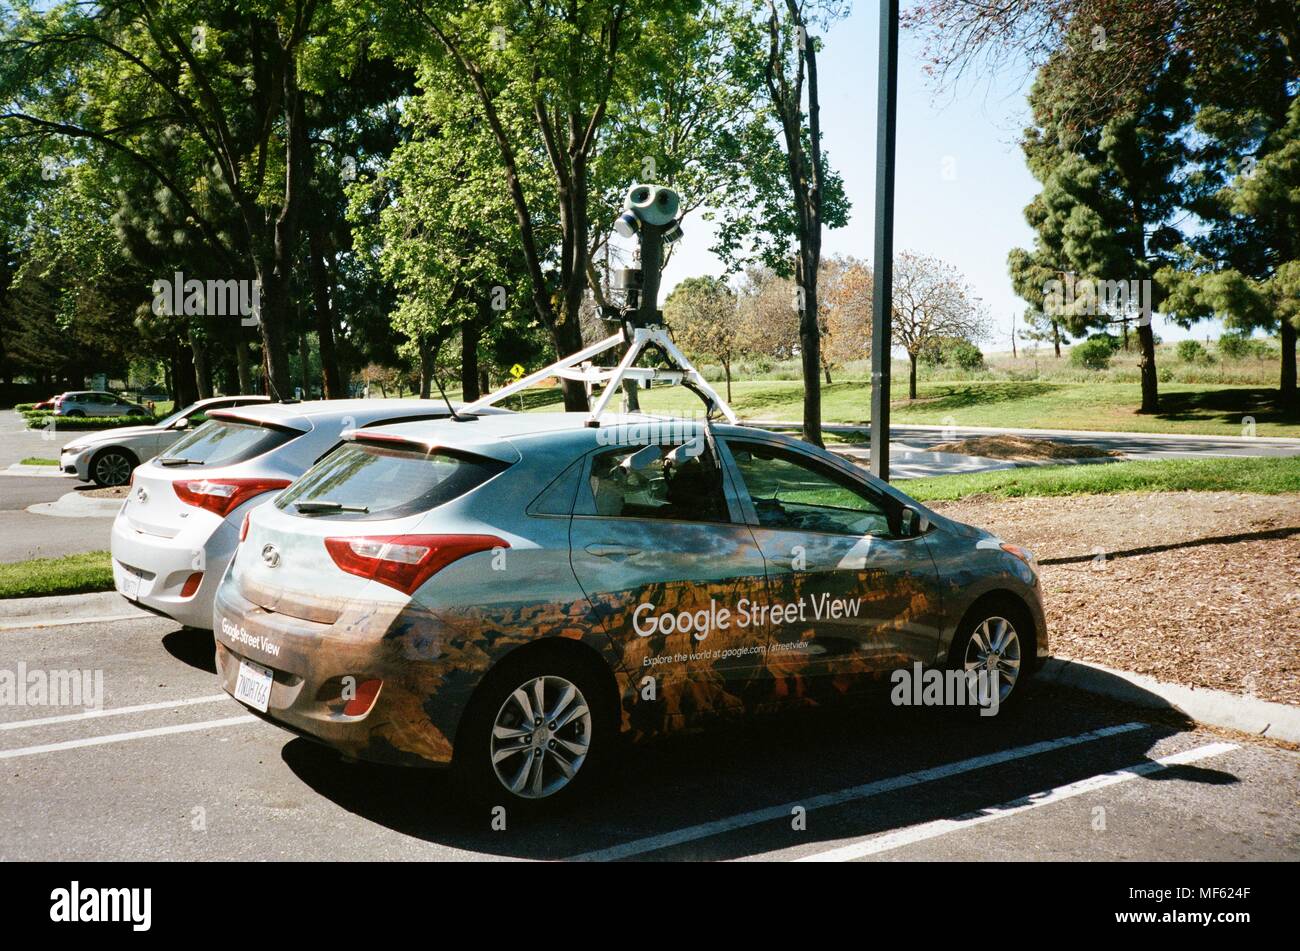 Google Street View vehicle with Street View logo and automated 3D camera system parked at the Googleplex, the Silicon Valley headquarters of search engine and technology company Google Inc in Mountain View, California, April 14, 2018. () Stock Photo